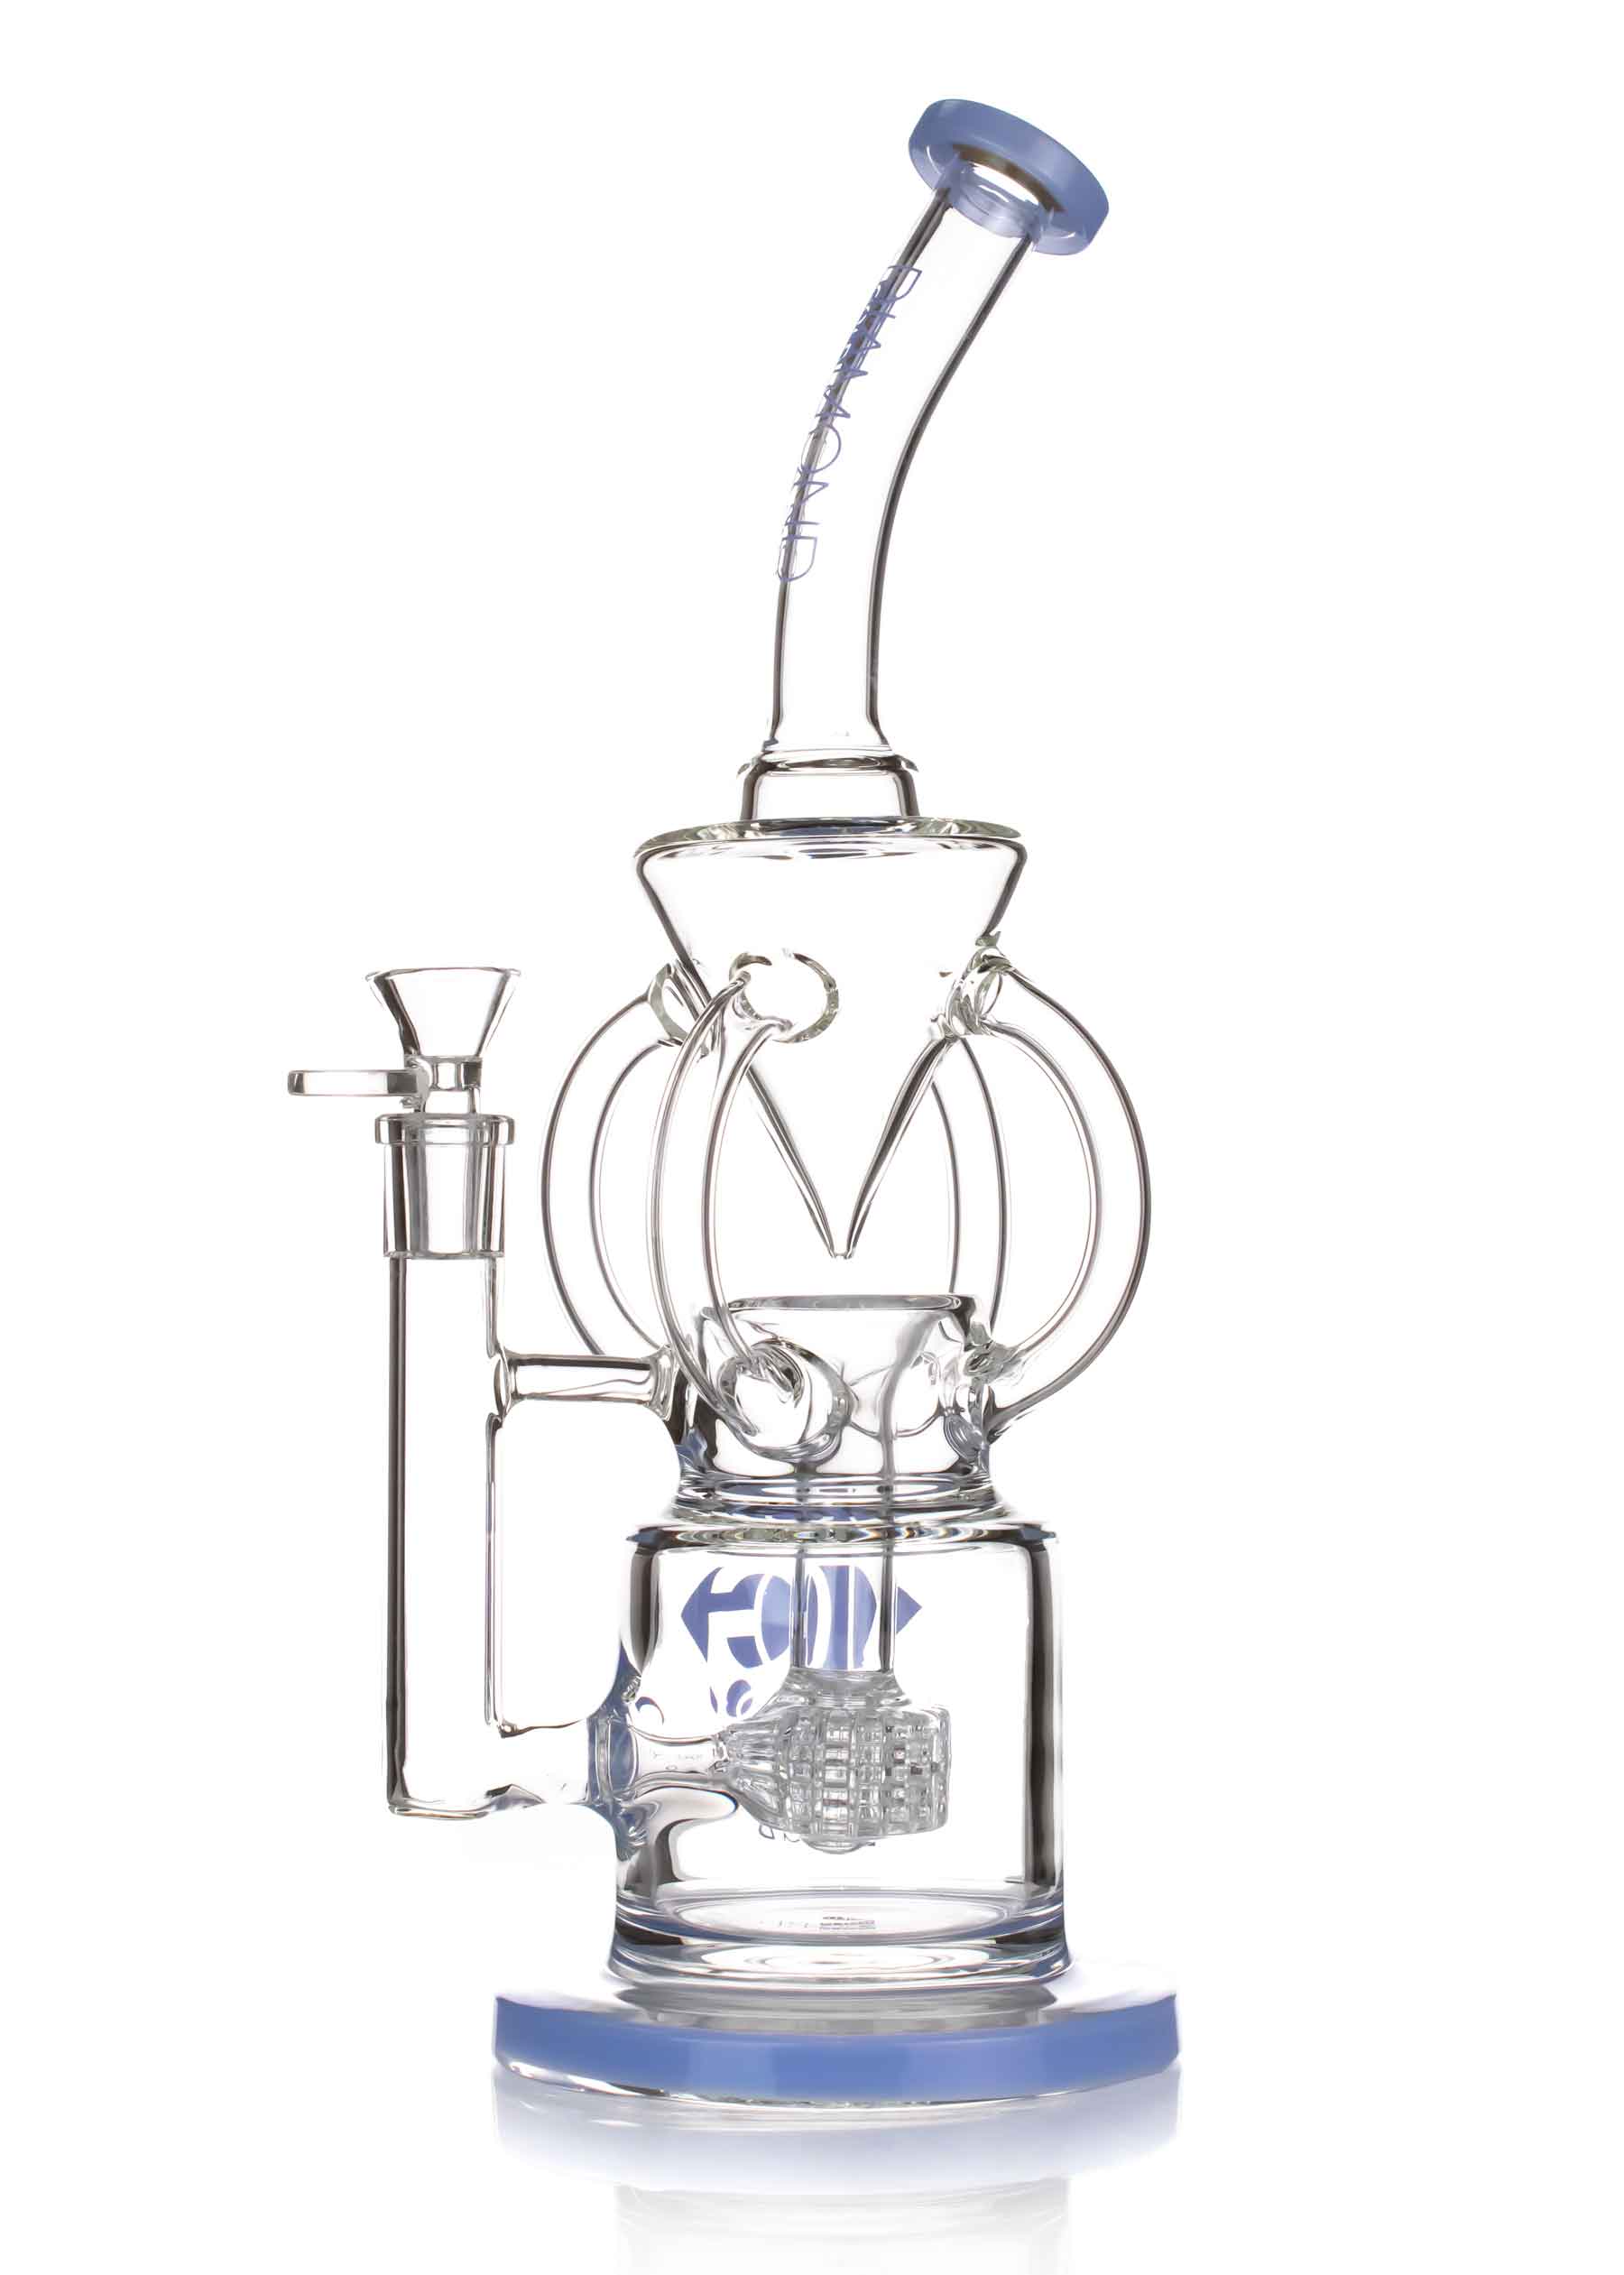 recycler oil rig